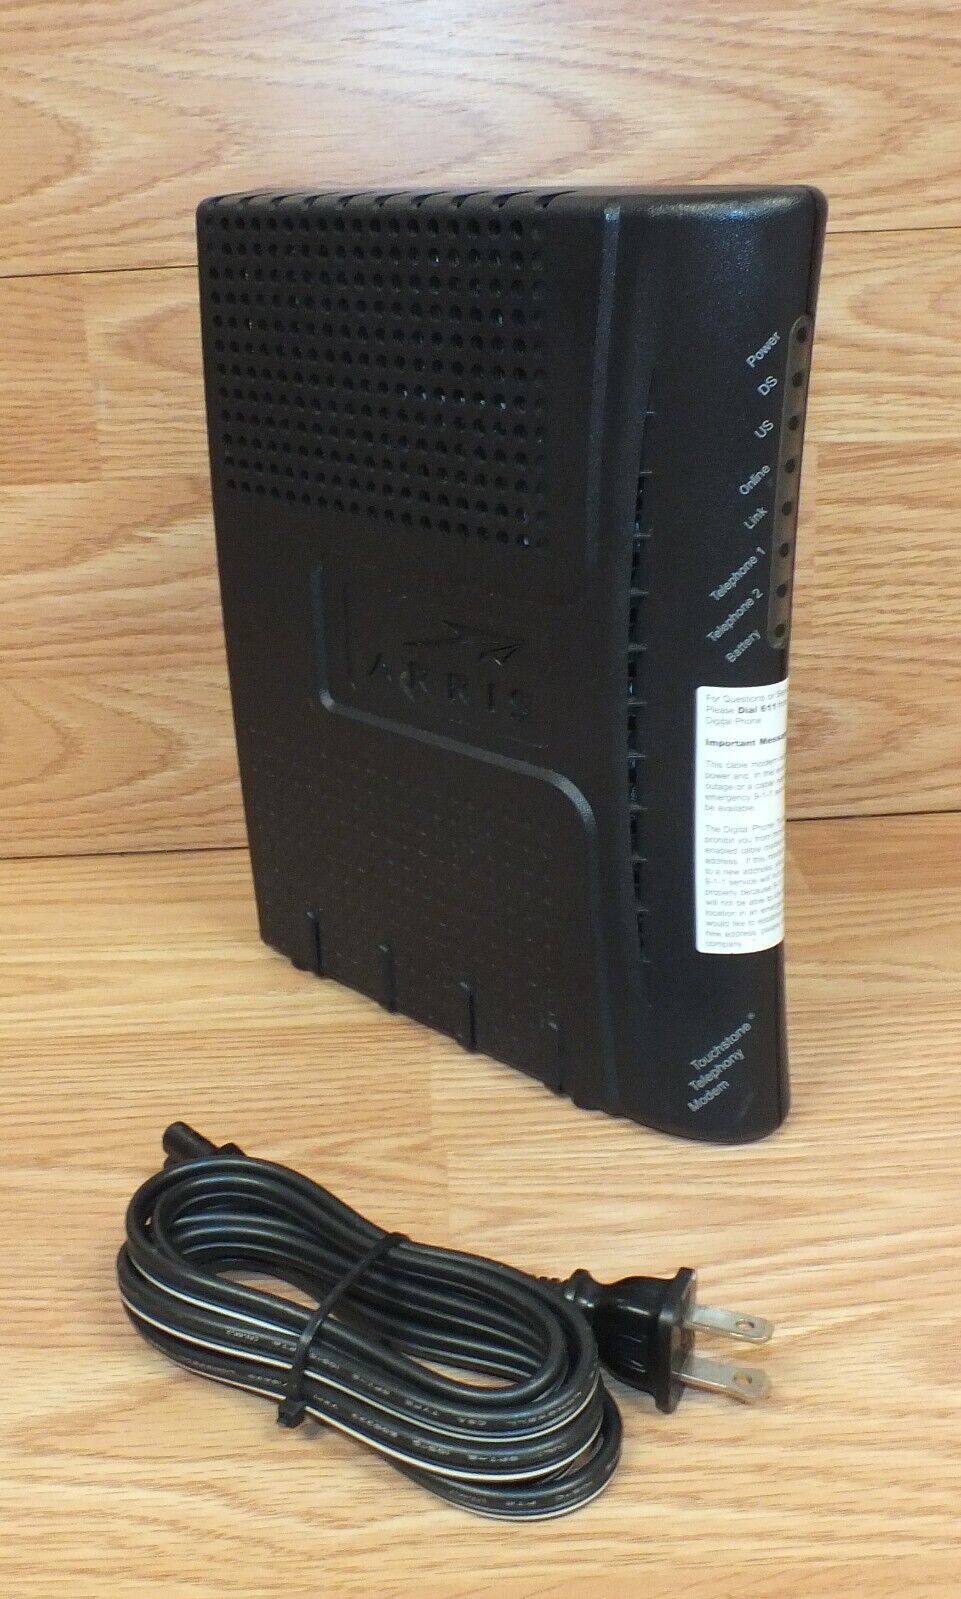 Arris Touchstone TM602G Telephony Cable Modem With Battery Back-Up Option